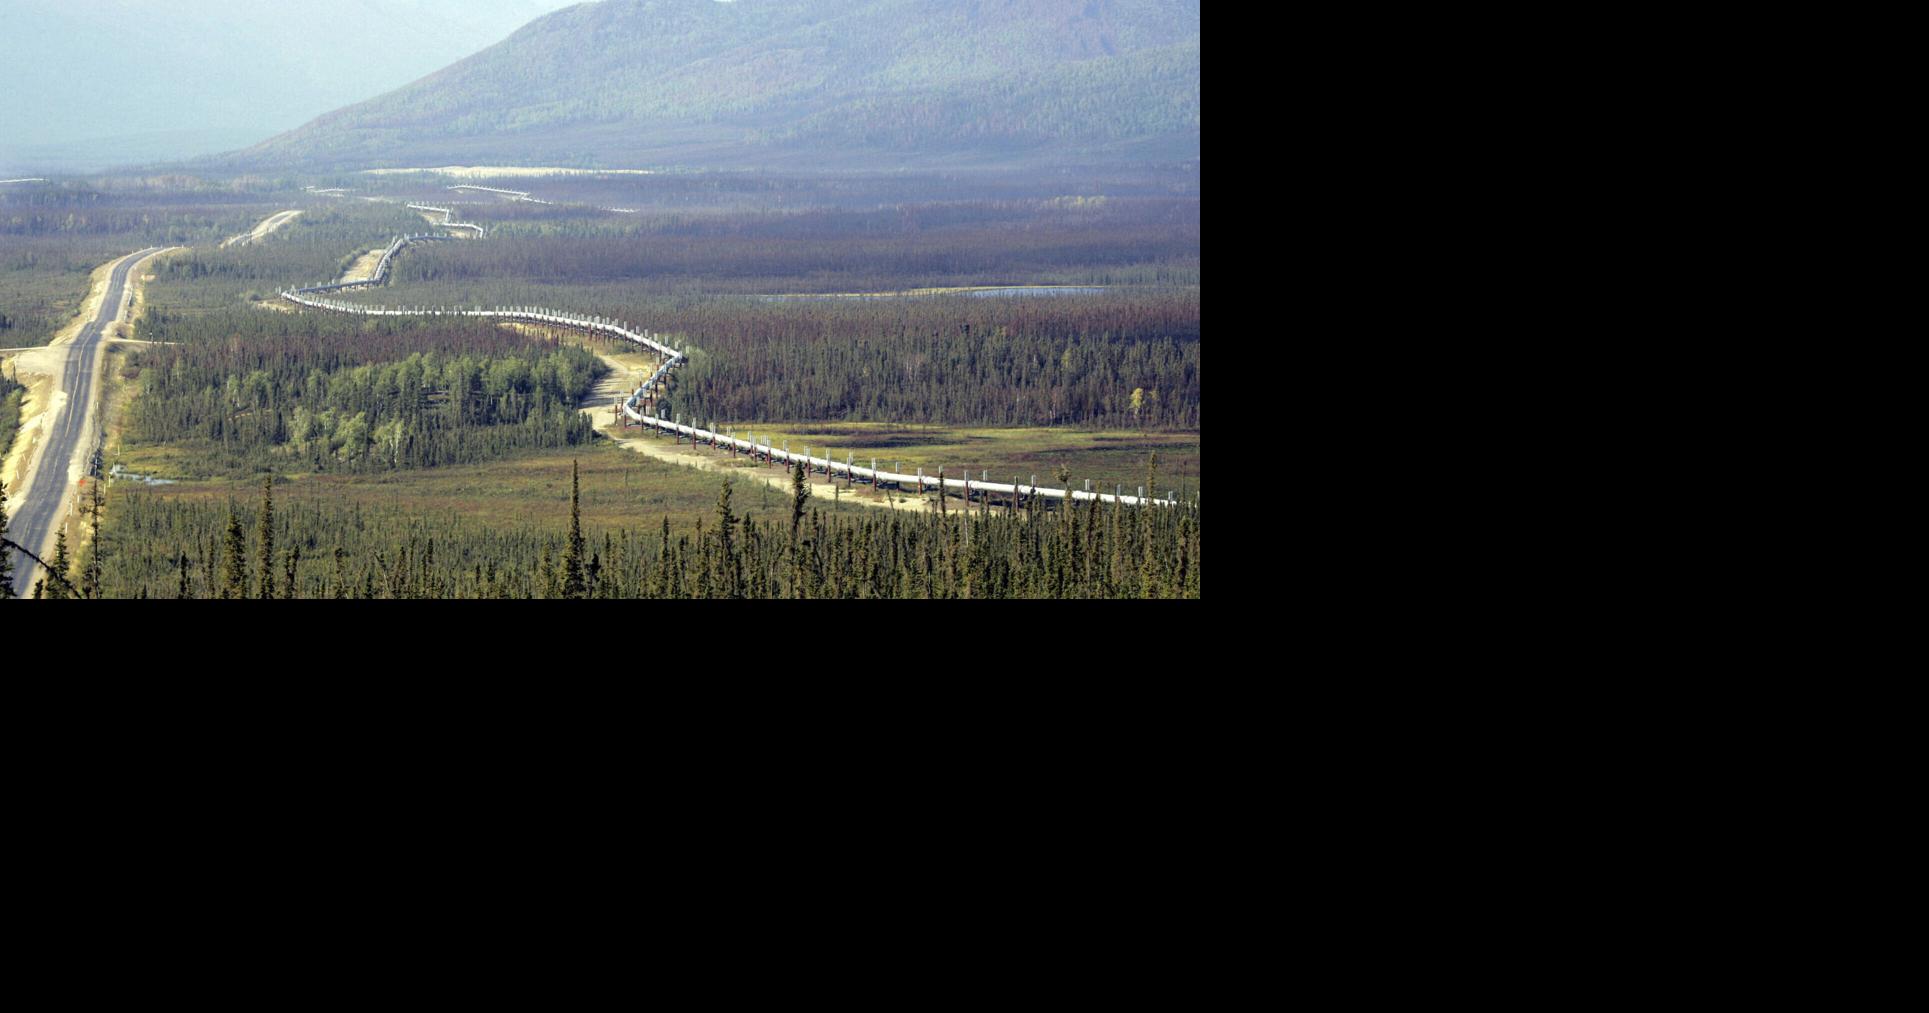 Environmentalists urge US to plan 'phased shutdown' of Alaska's main oil pipeline amid climate concerns | State and regional